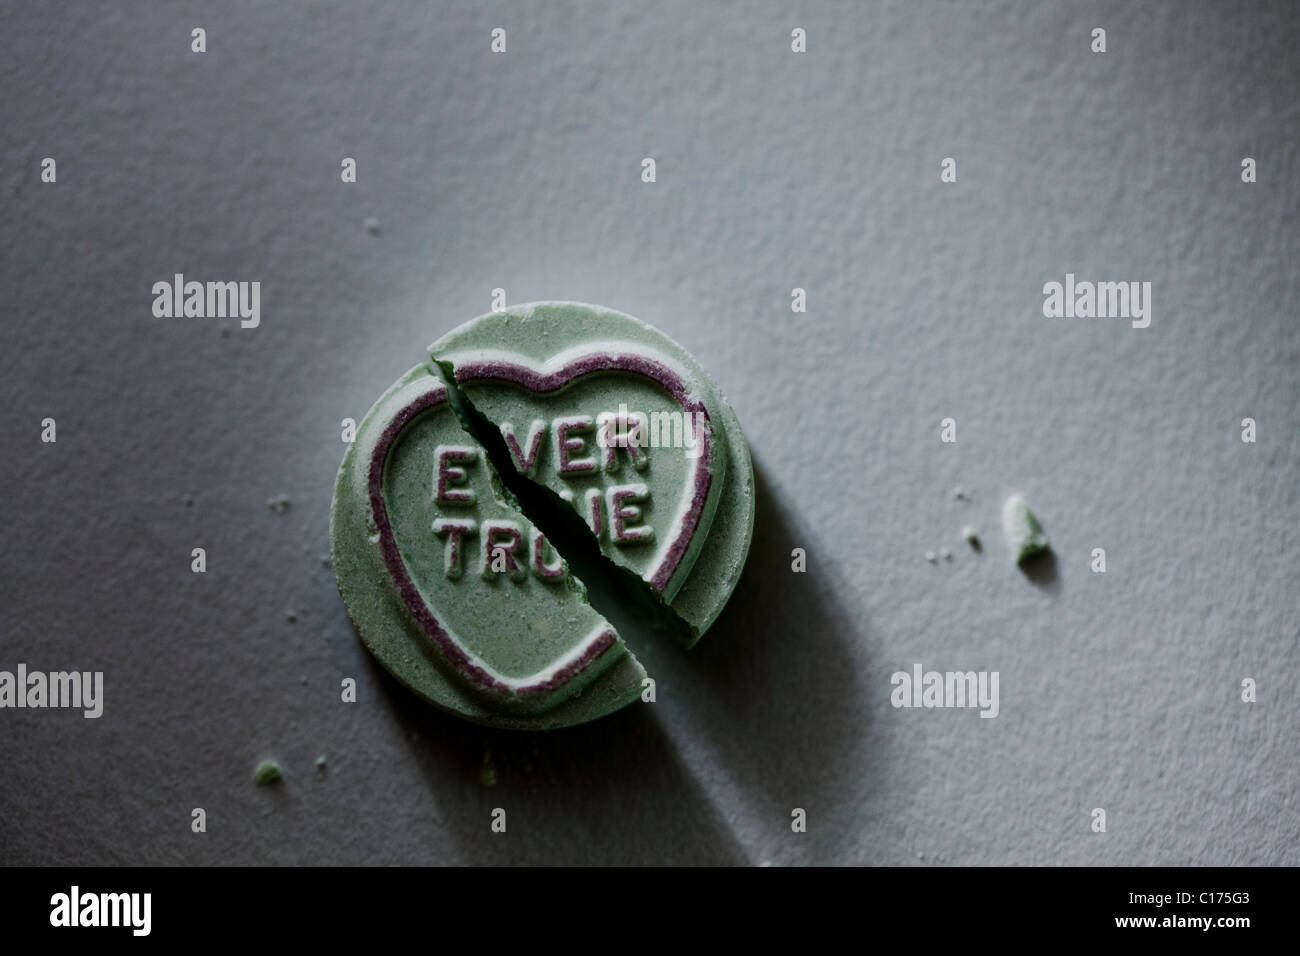 A broken love heart sweet with the message 'Ever True' Stock Photo